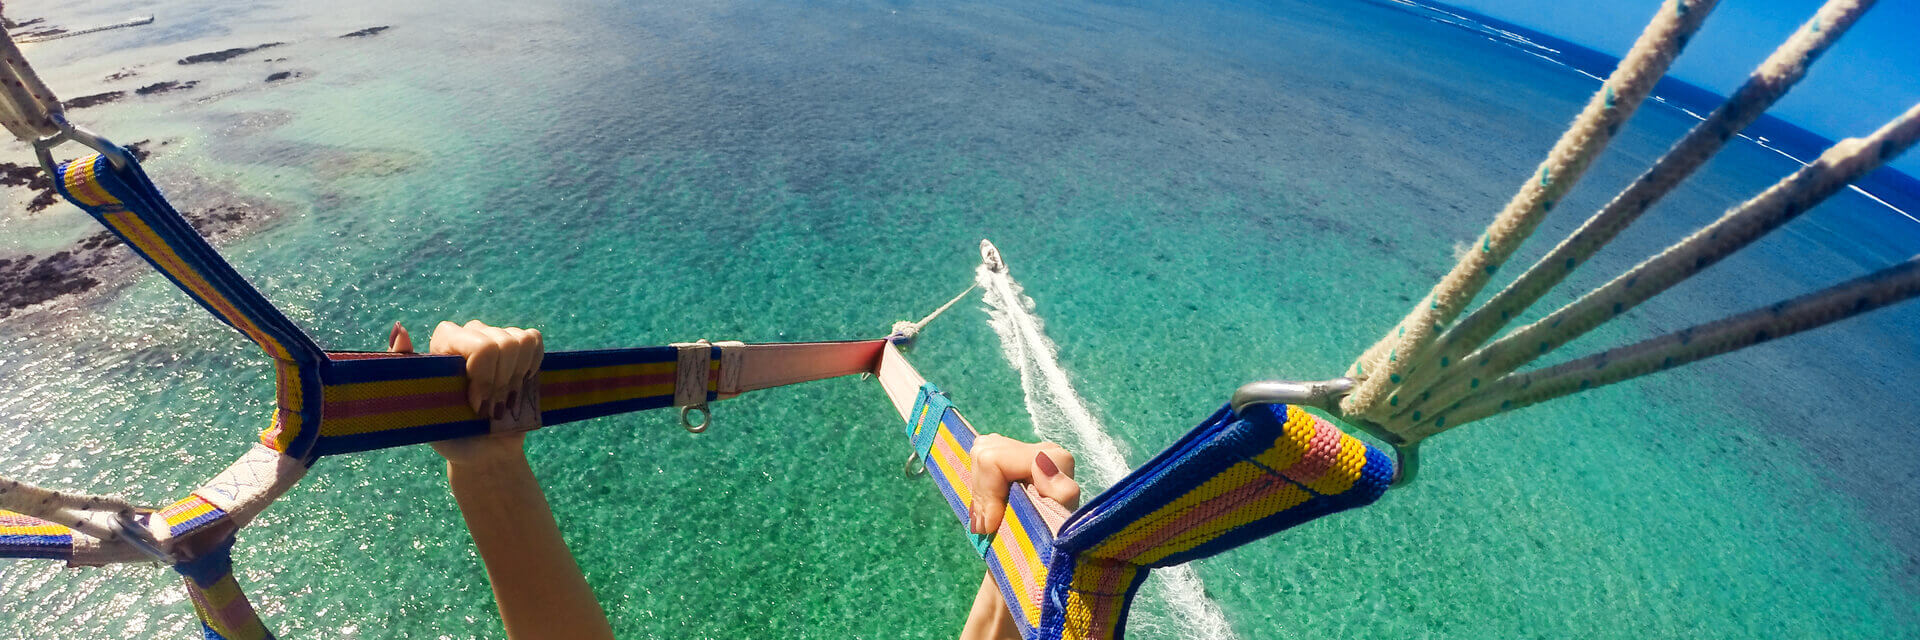 person parasailing high above water and the boat pulling them